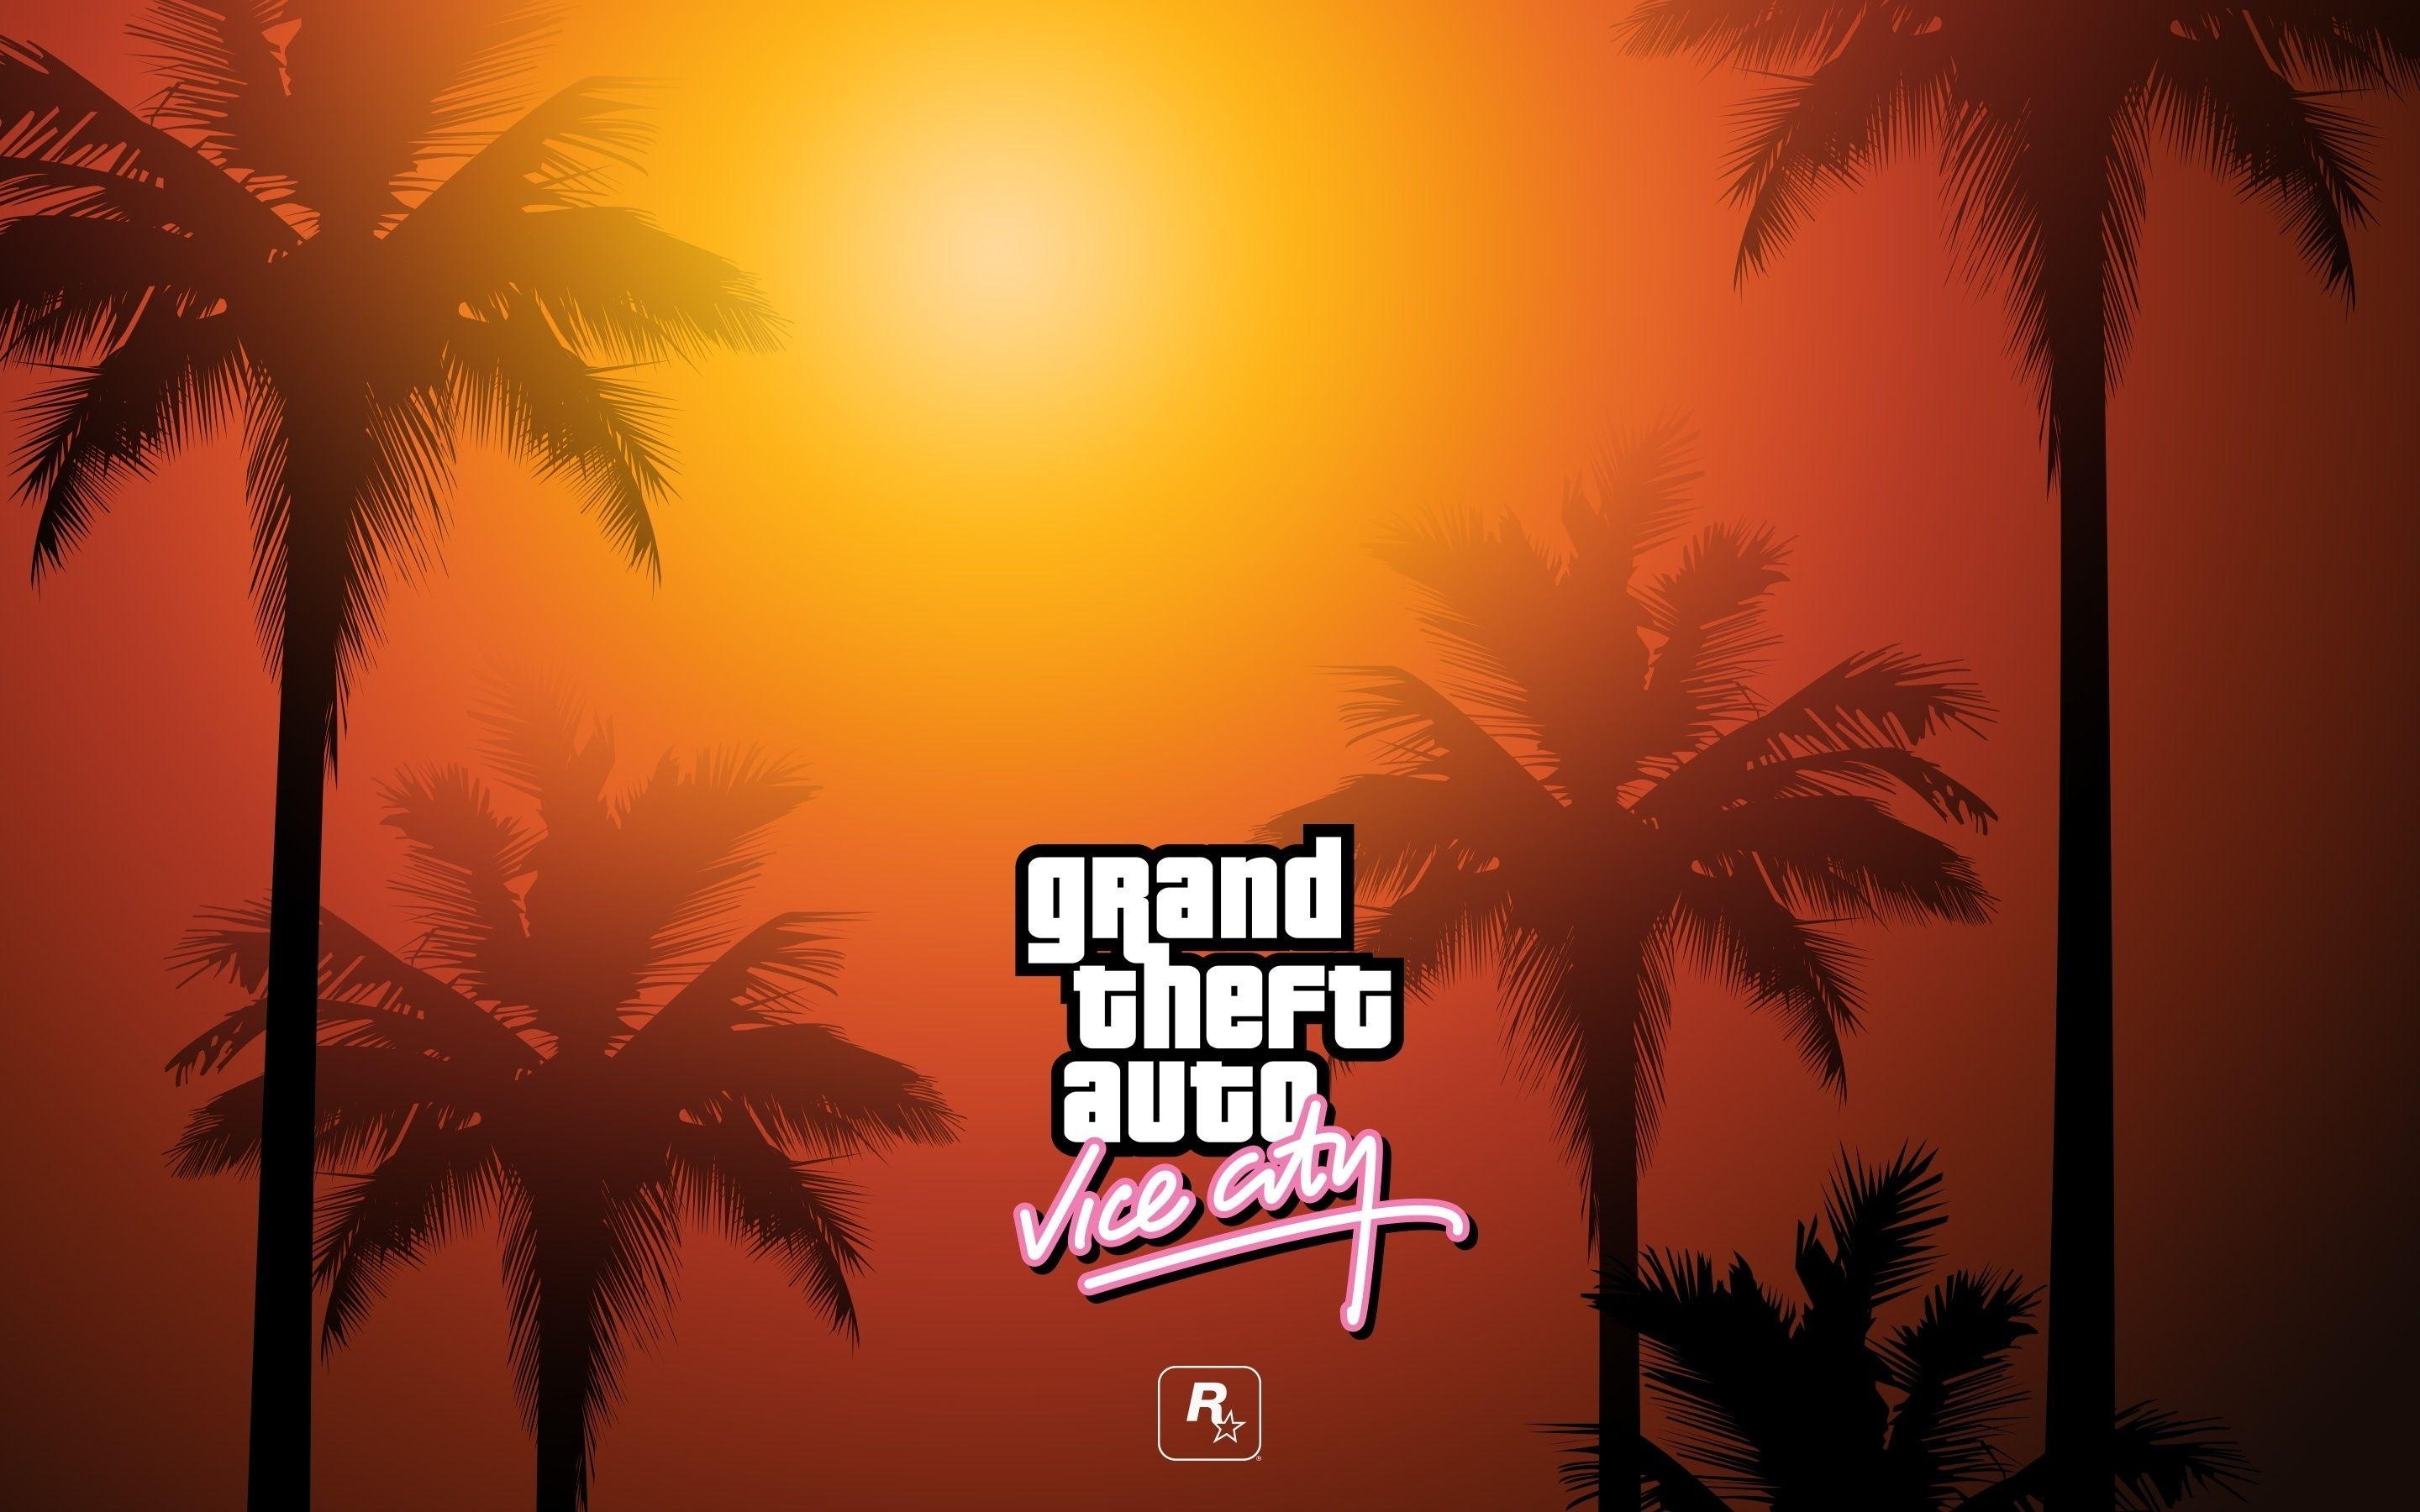 GTA: Vice City, Iconic gaming, Stylish wallpapers, Action-packed gameplay, 2880x1800 HD Desktop